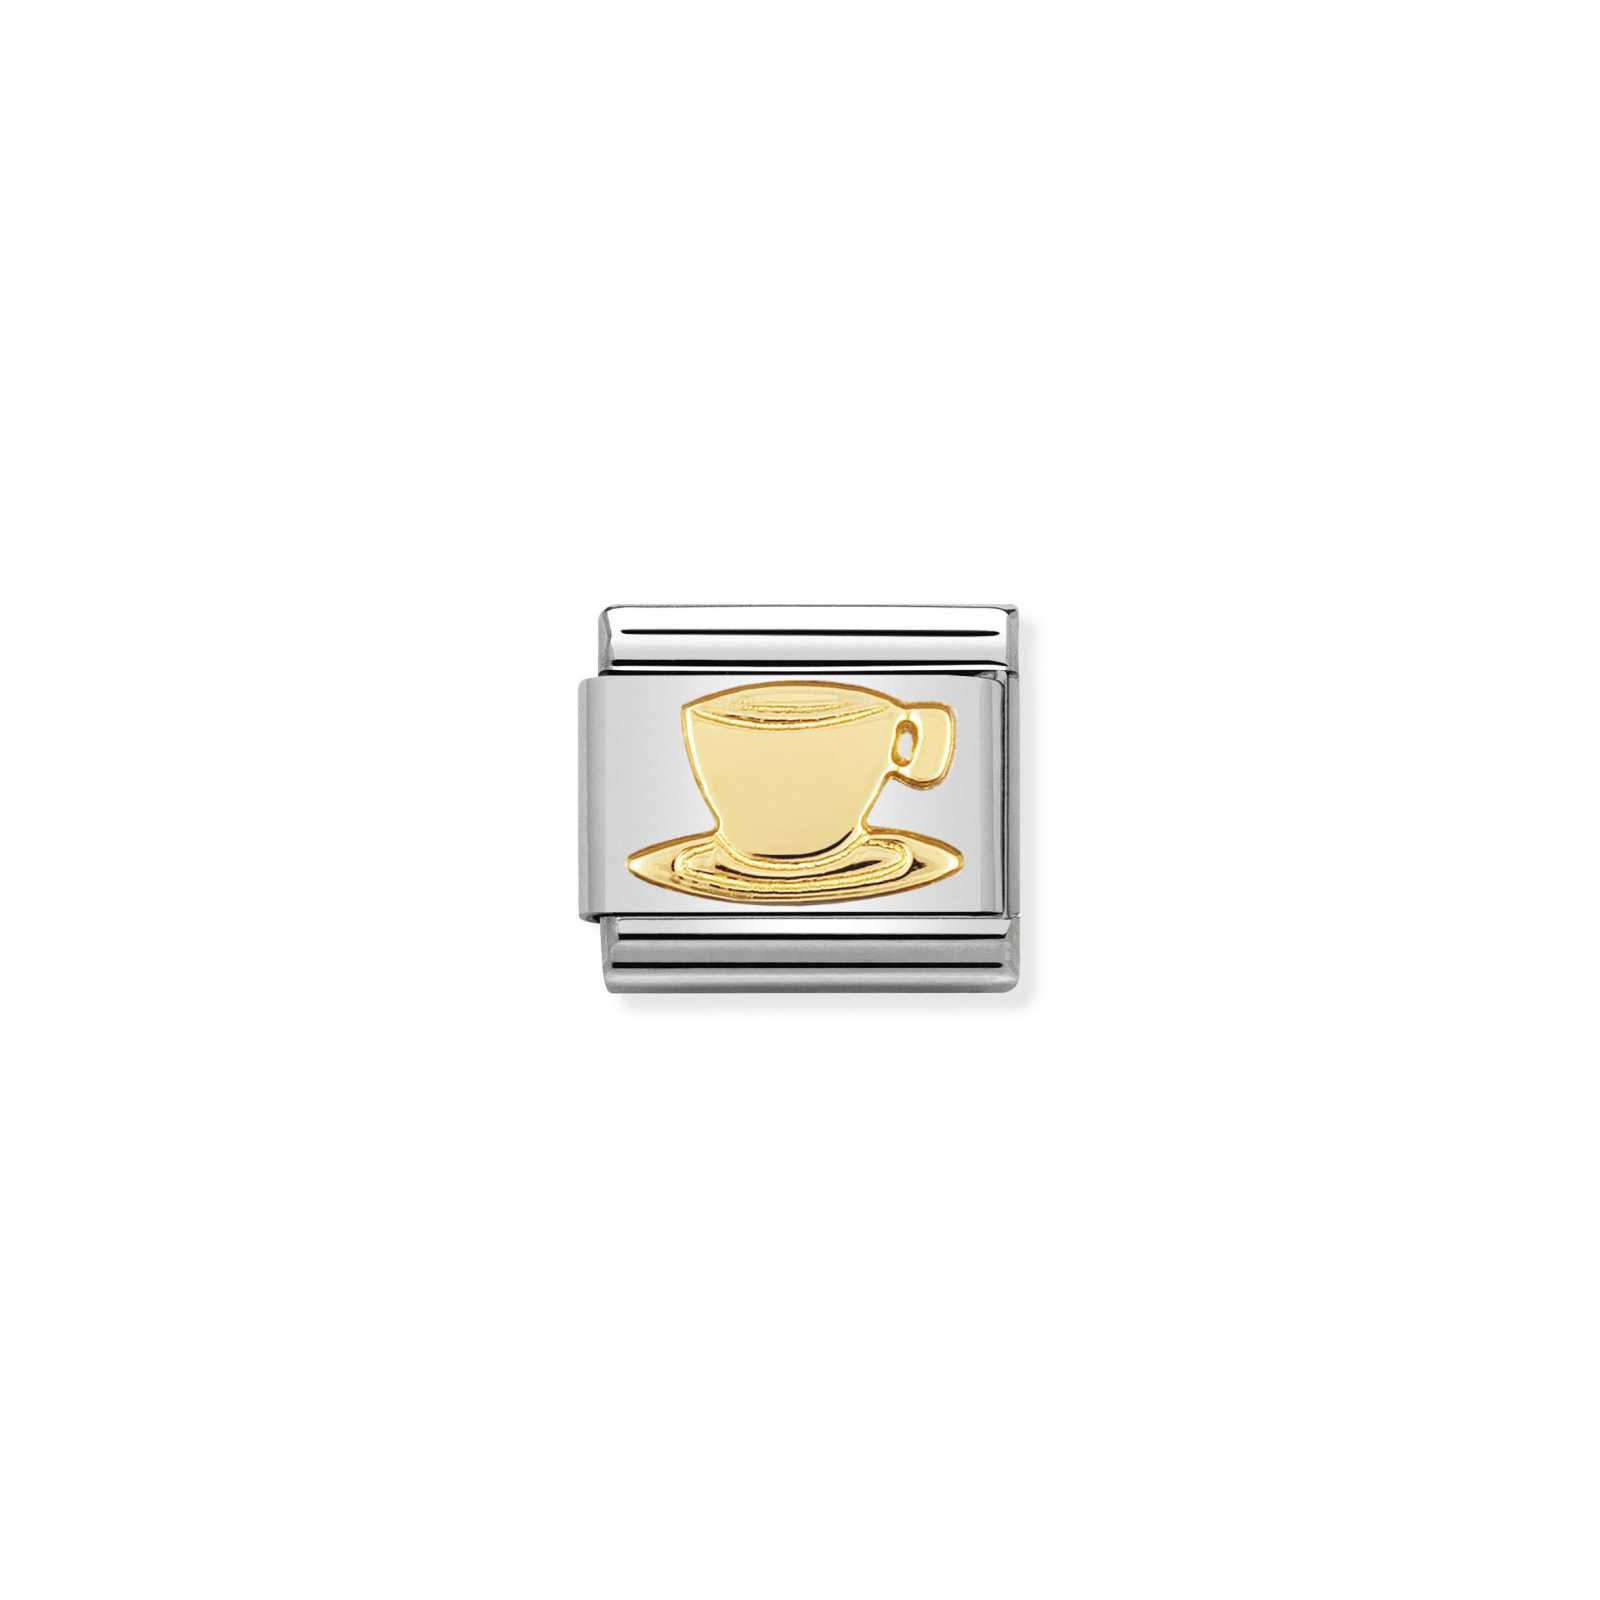 Nomination Coffee Cup Charm - Stainless Steel